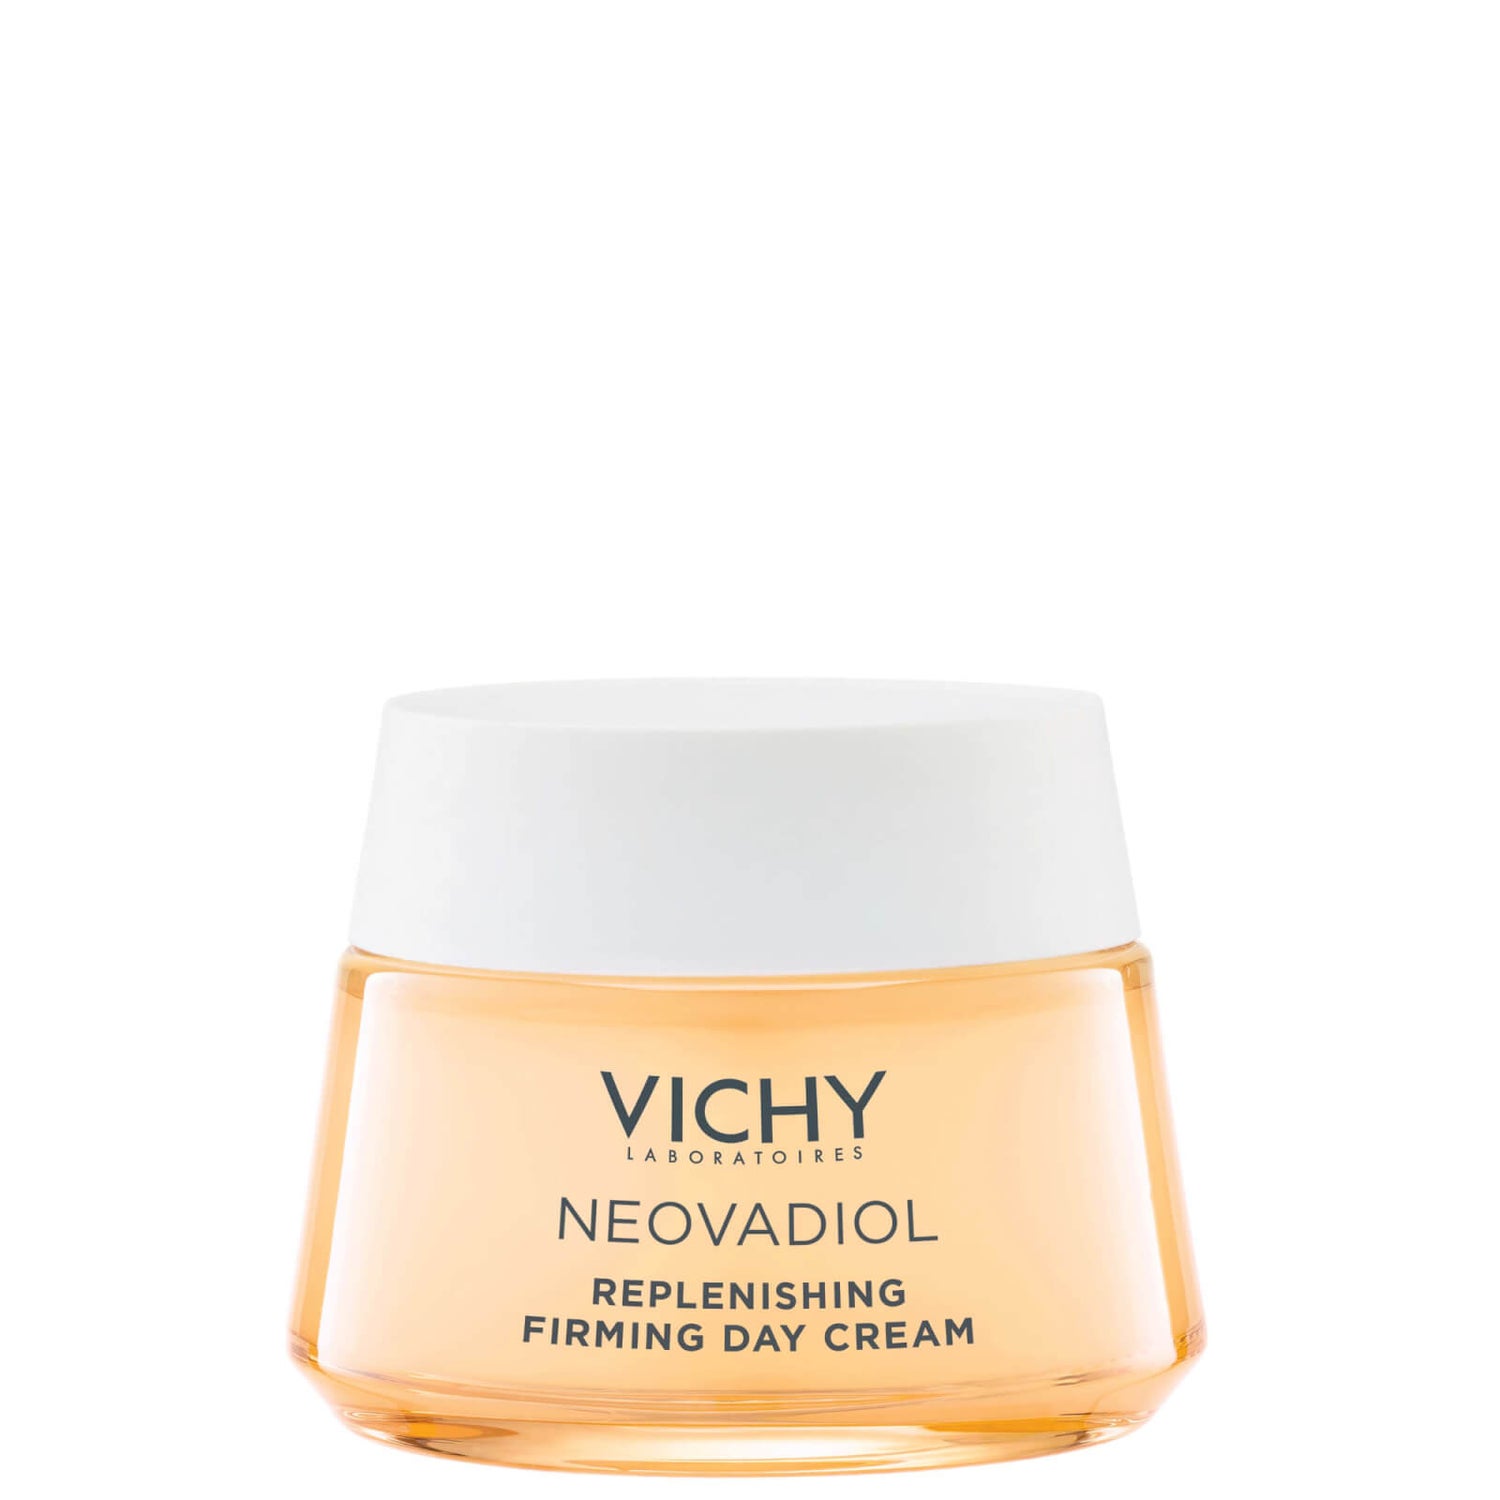 Vichy Neovodial Replenishing Day Cream for Post-Menopause 47ml